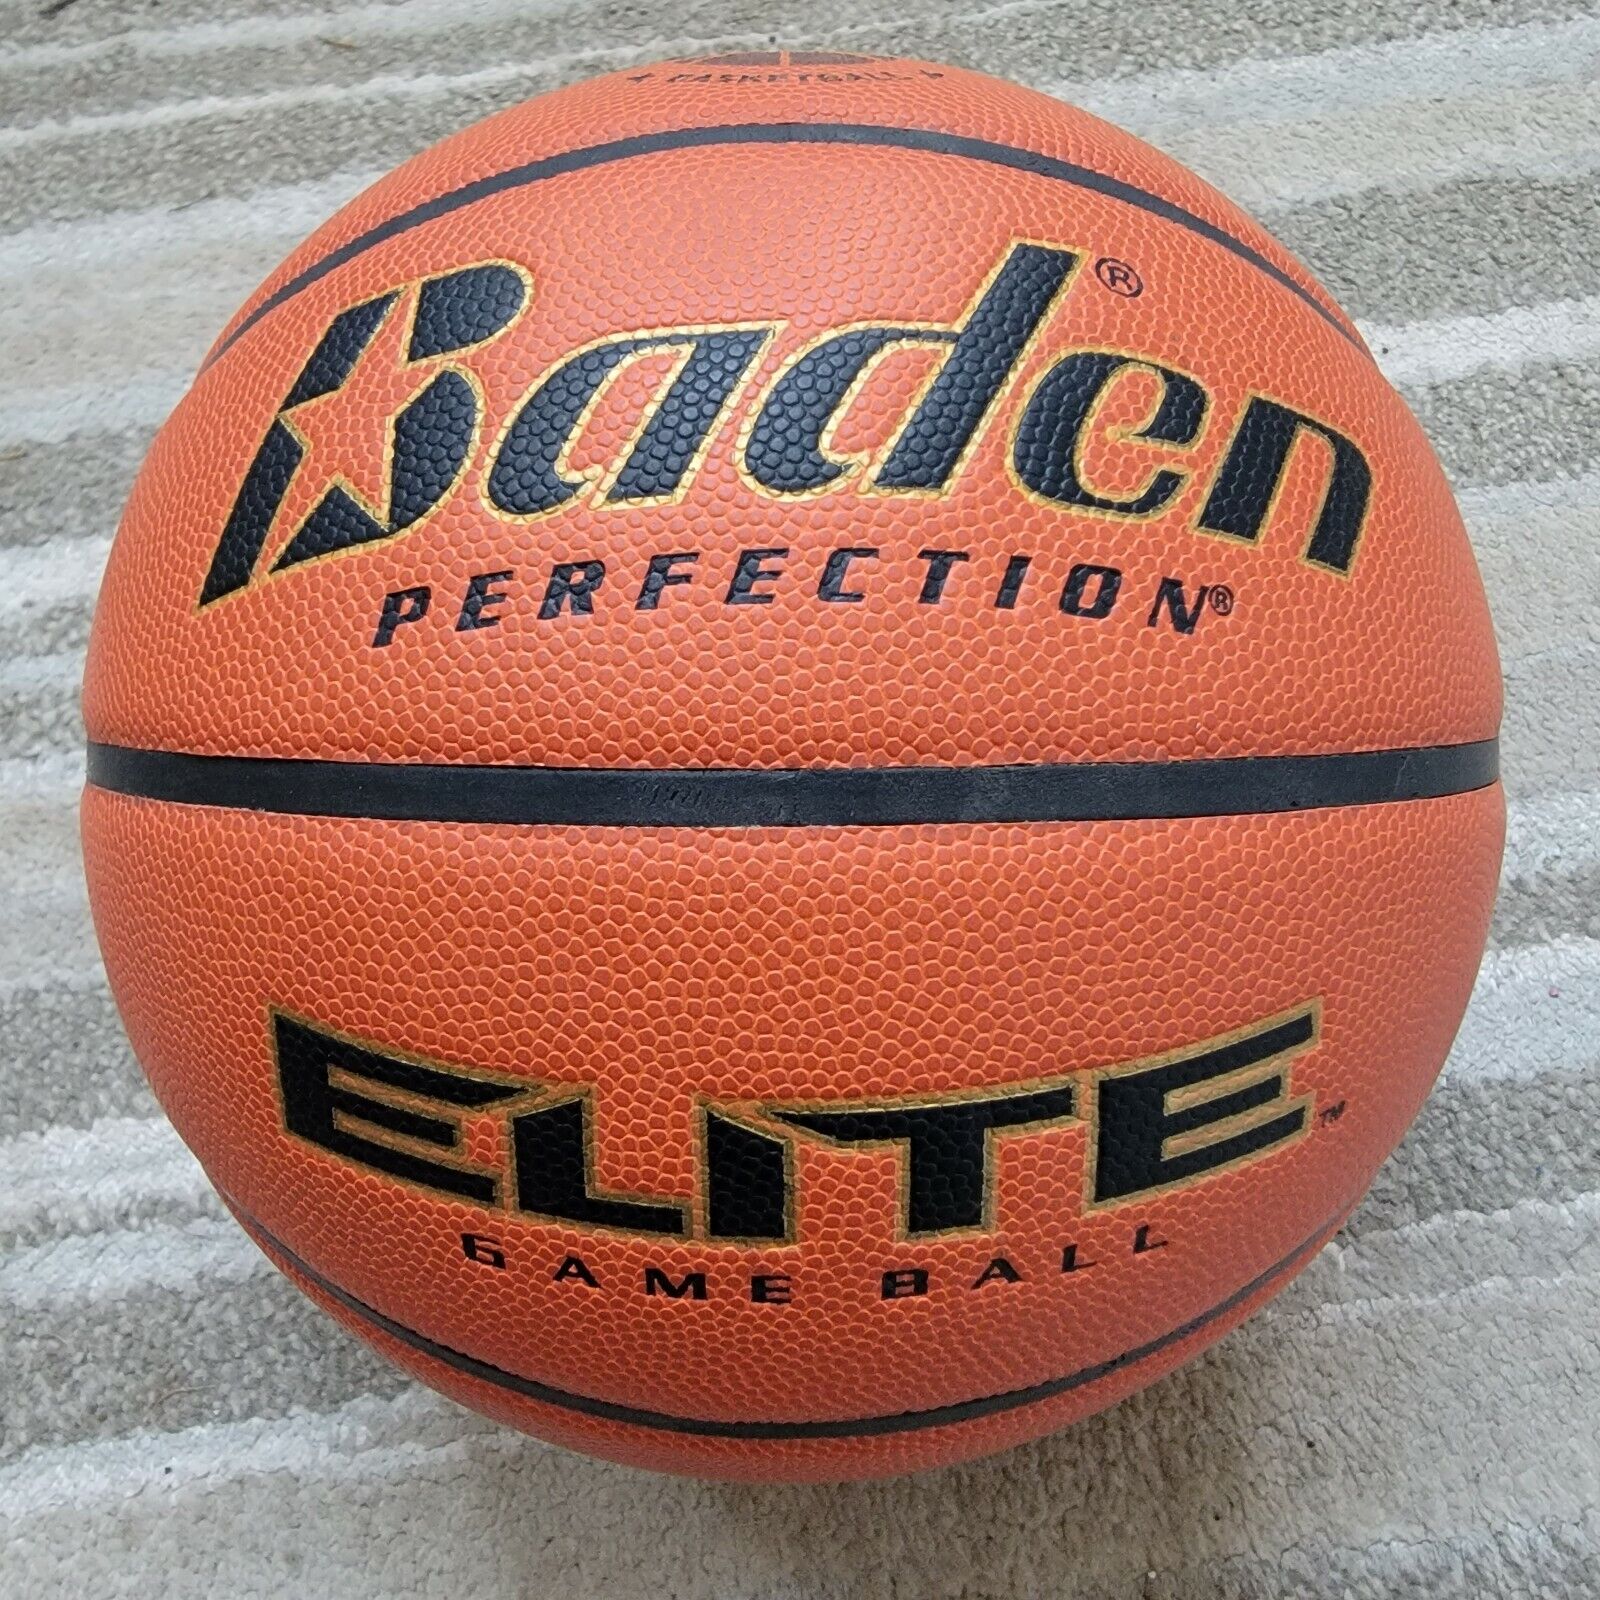 Baden National uniform free shipping Perfection Elite Official 29.5 Men's Japan's largest assortment Basketball